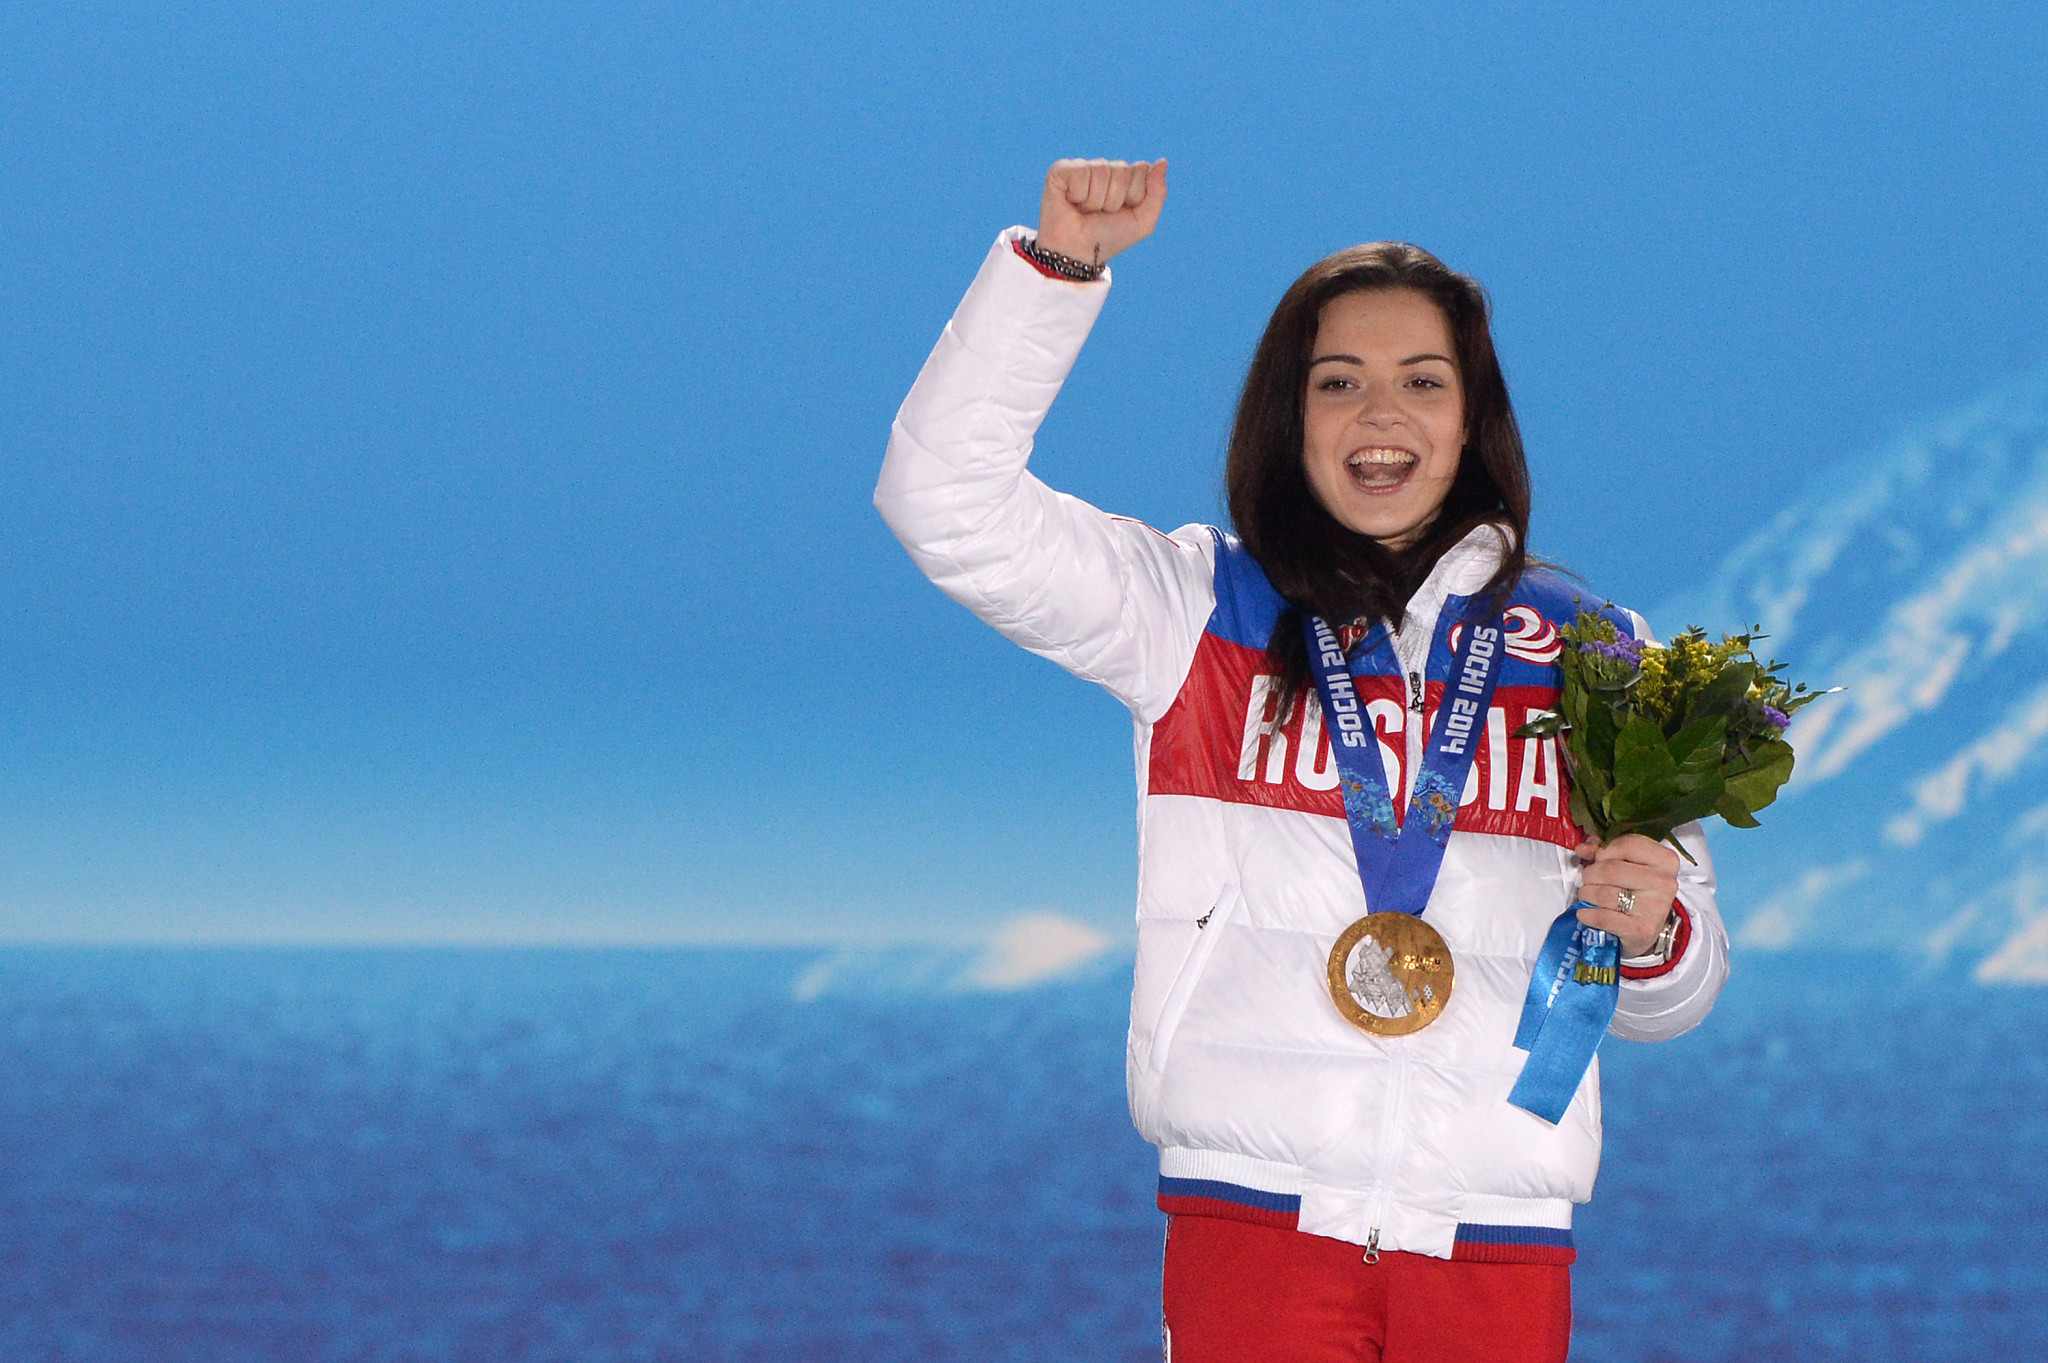 Russia's Adelina Sotnikova was a controversial winner of the women's singles figure skating event at Sochi 2014 ©Getty Images